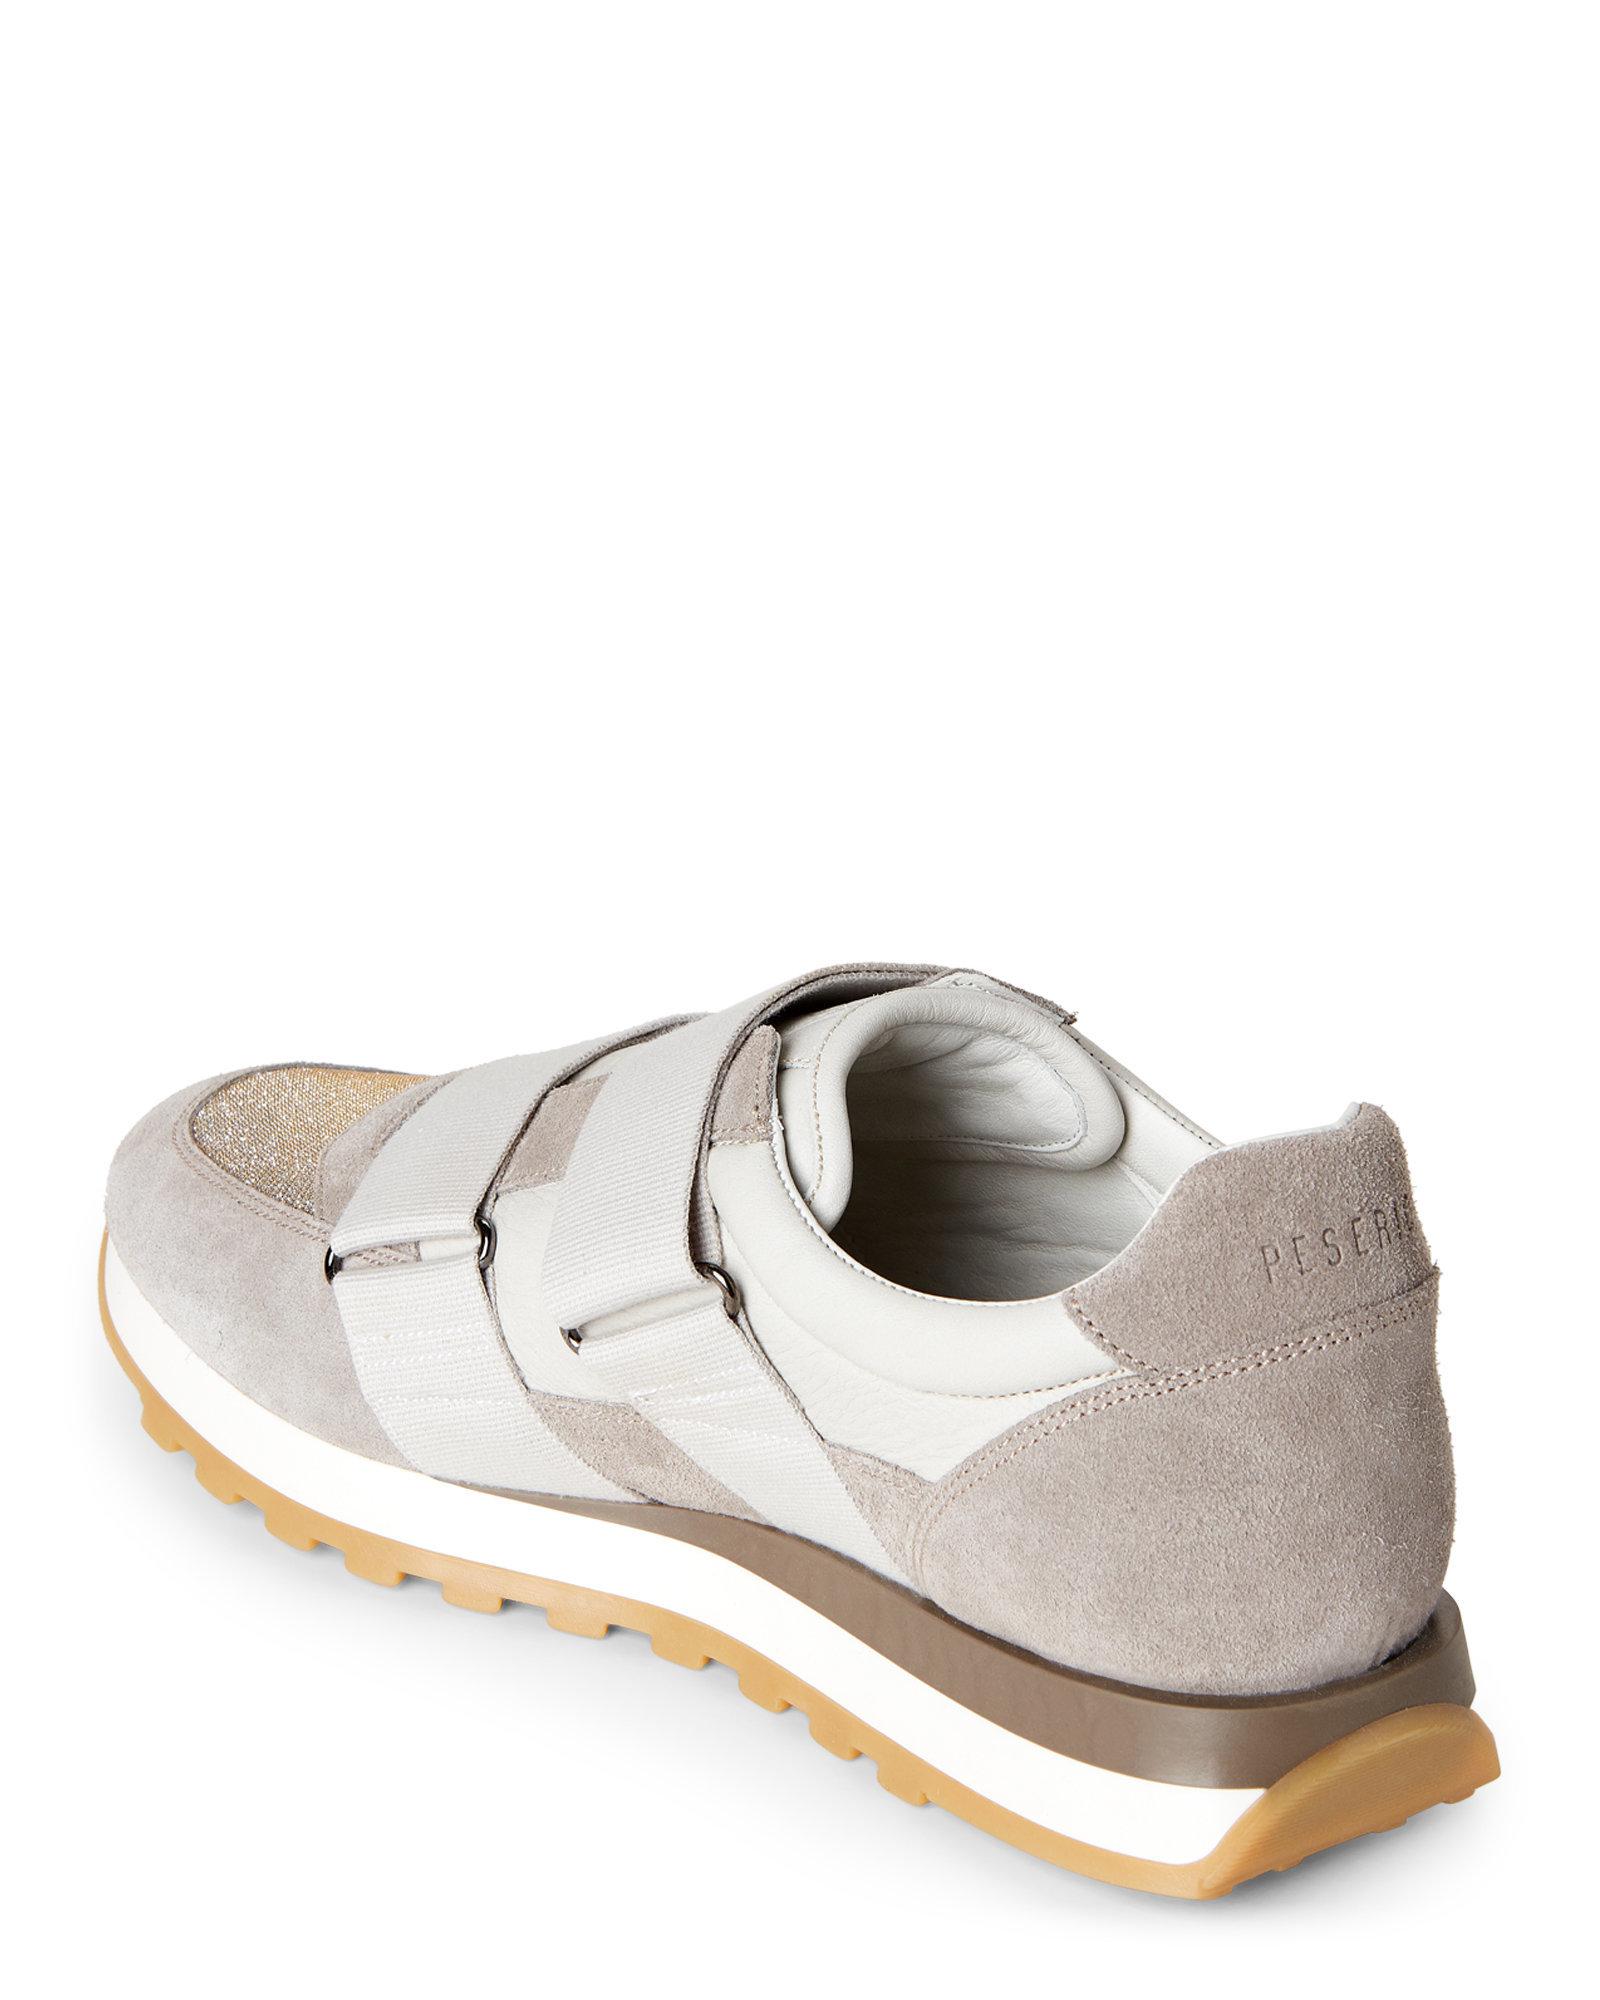 Peserico Suede Grey Mixed Media Strap Jogger Sneakers in Gray - Lyst